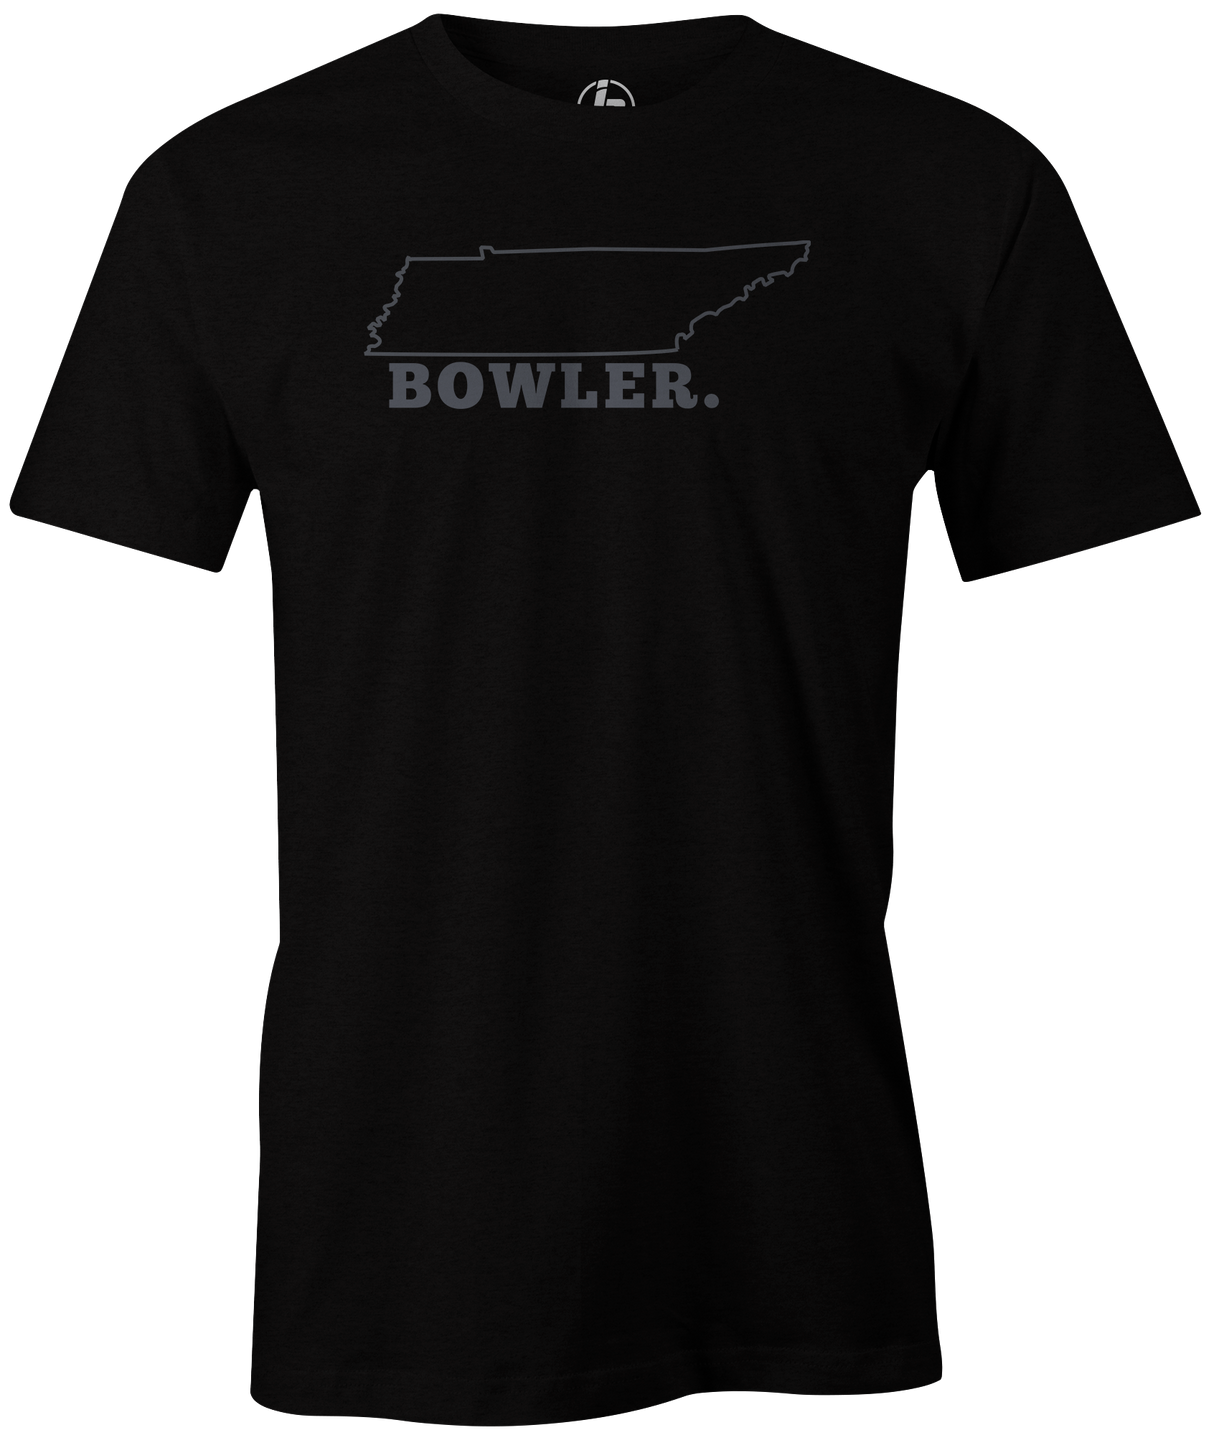 Tennessee Men's State Bowling T-shirt, Black, Cool, novelty, tshirt, tee, tee-shirt, tee shirt, teeshirt, team, comfortable